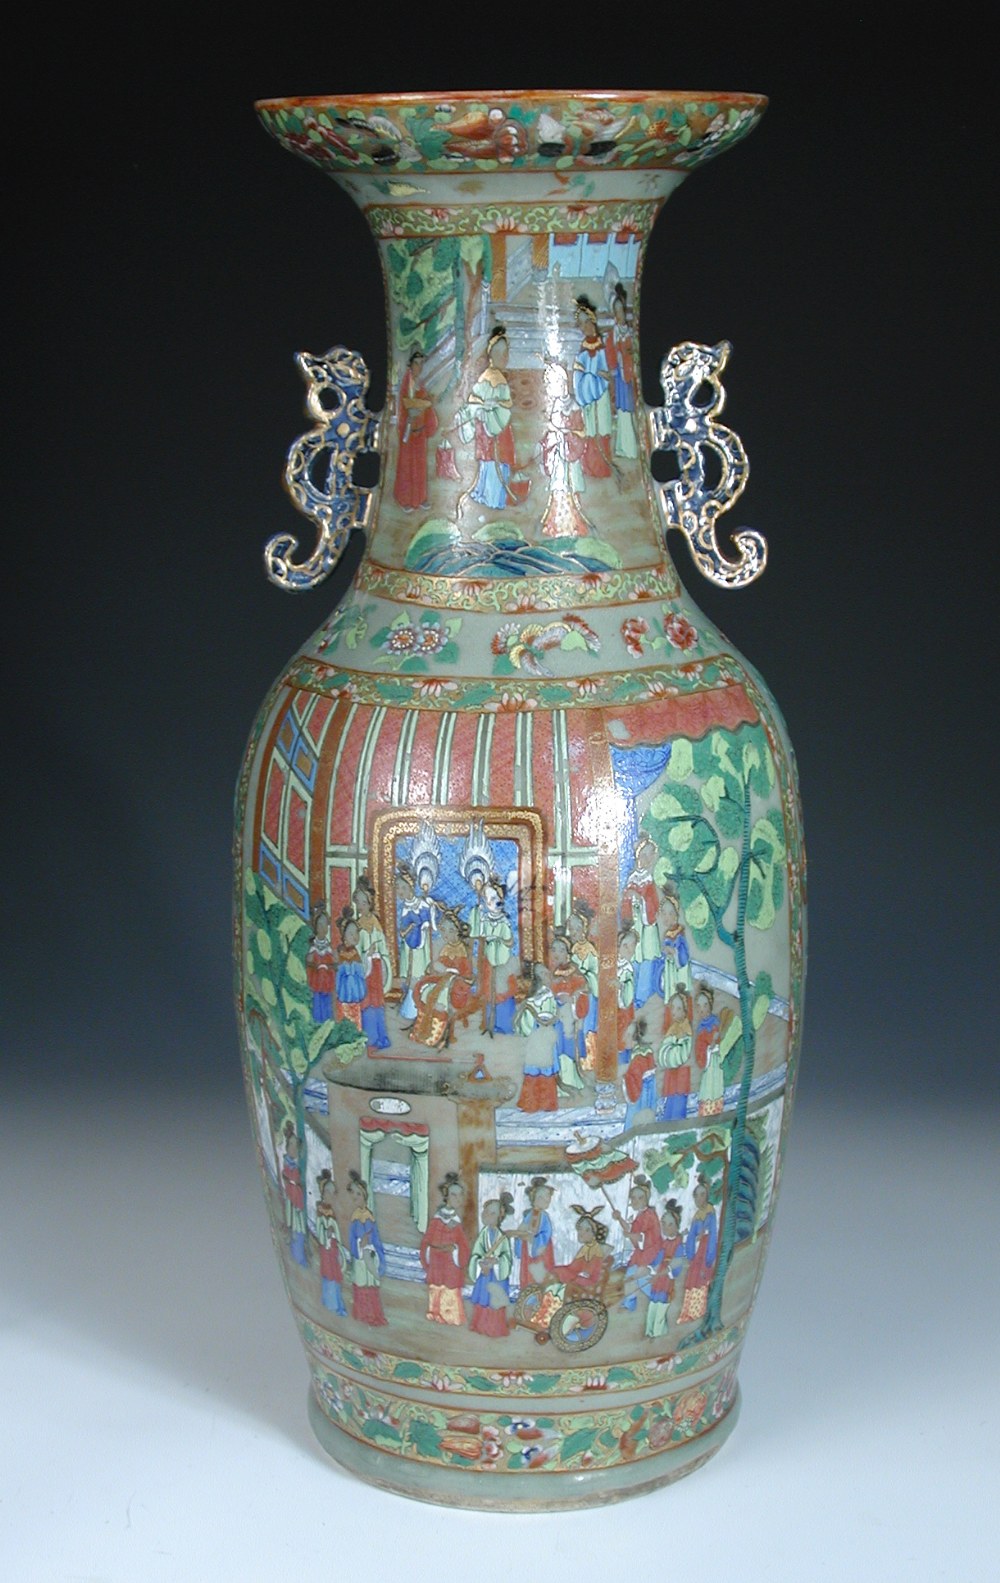 A 19th century Canton celadon ground vase, the neck with two dragon handles above a court scene